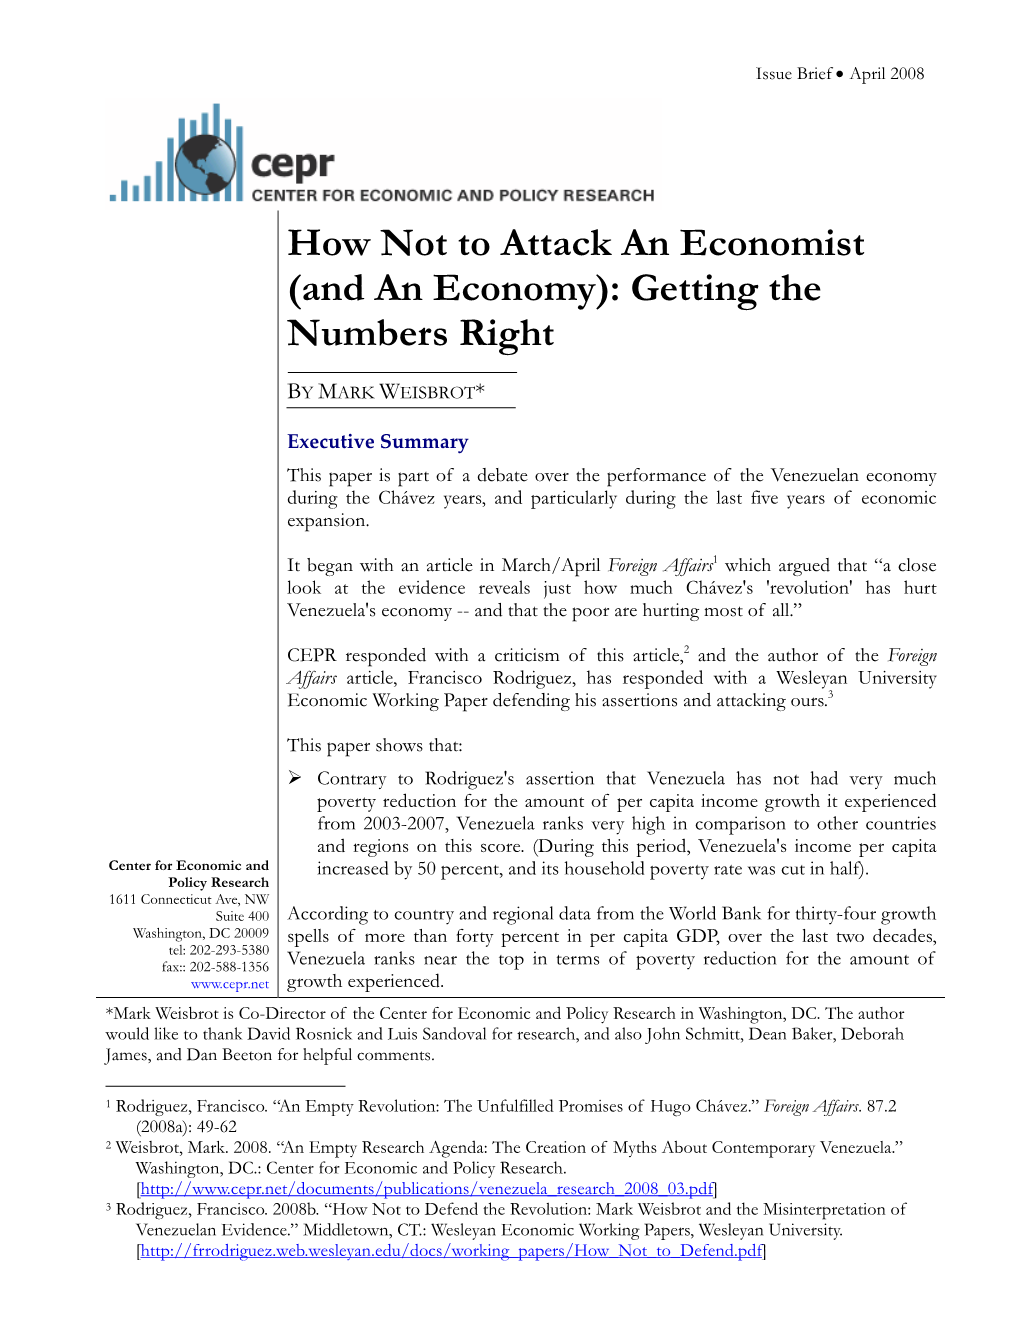 How Not to Attack an Economist (And an Economy): Getting the Numbers Right